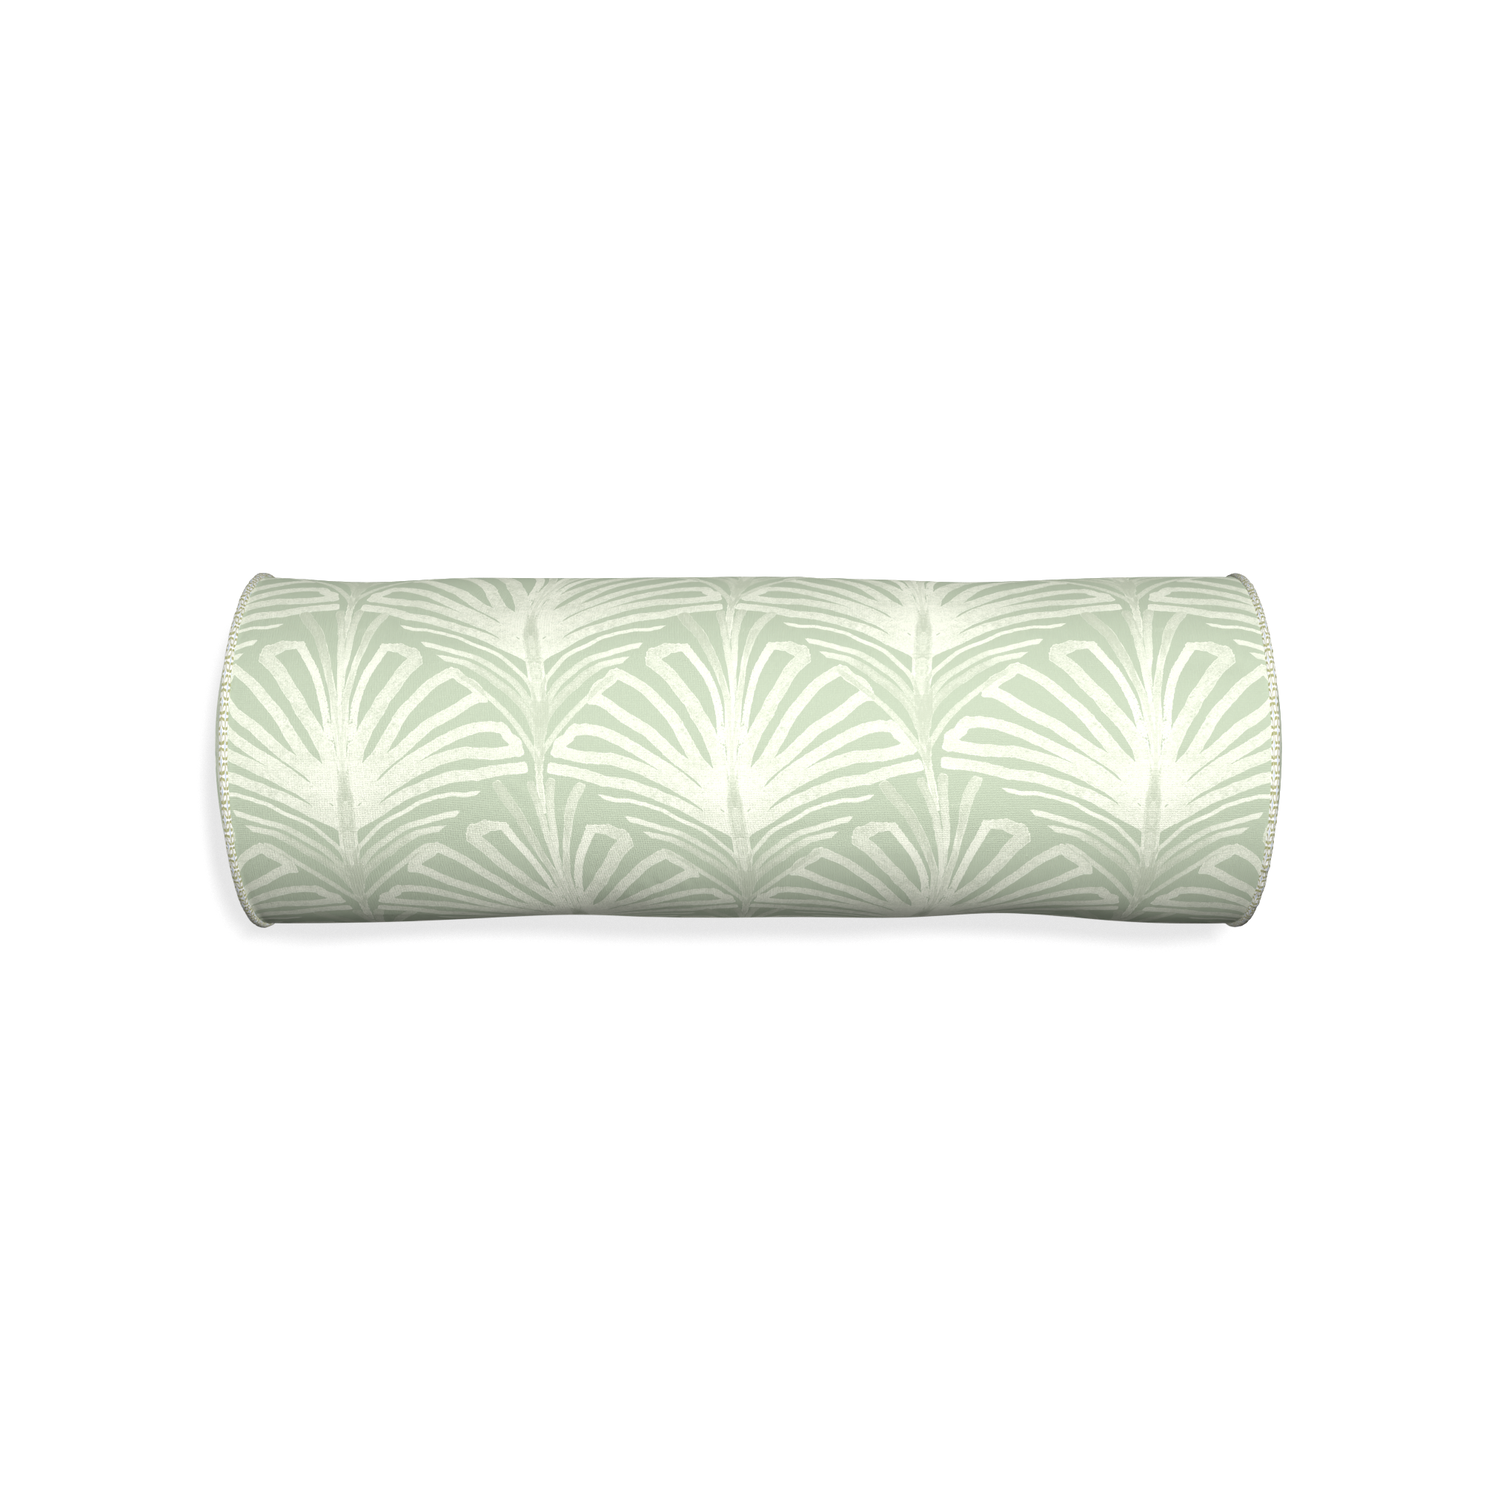 Bolster suzy sage custom pillow with l piping on white background